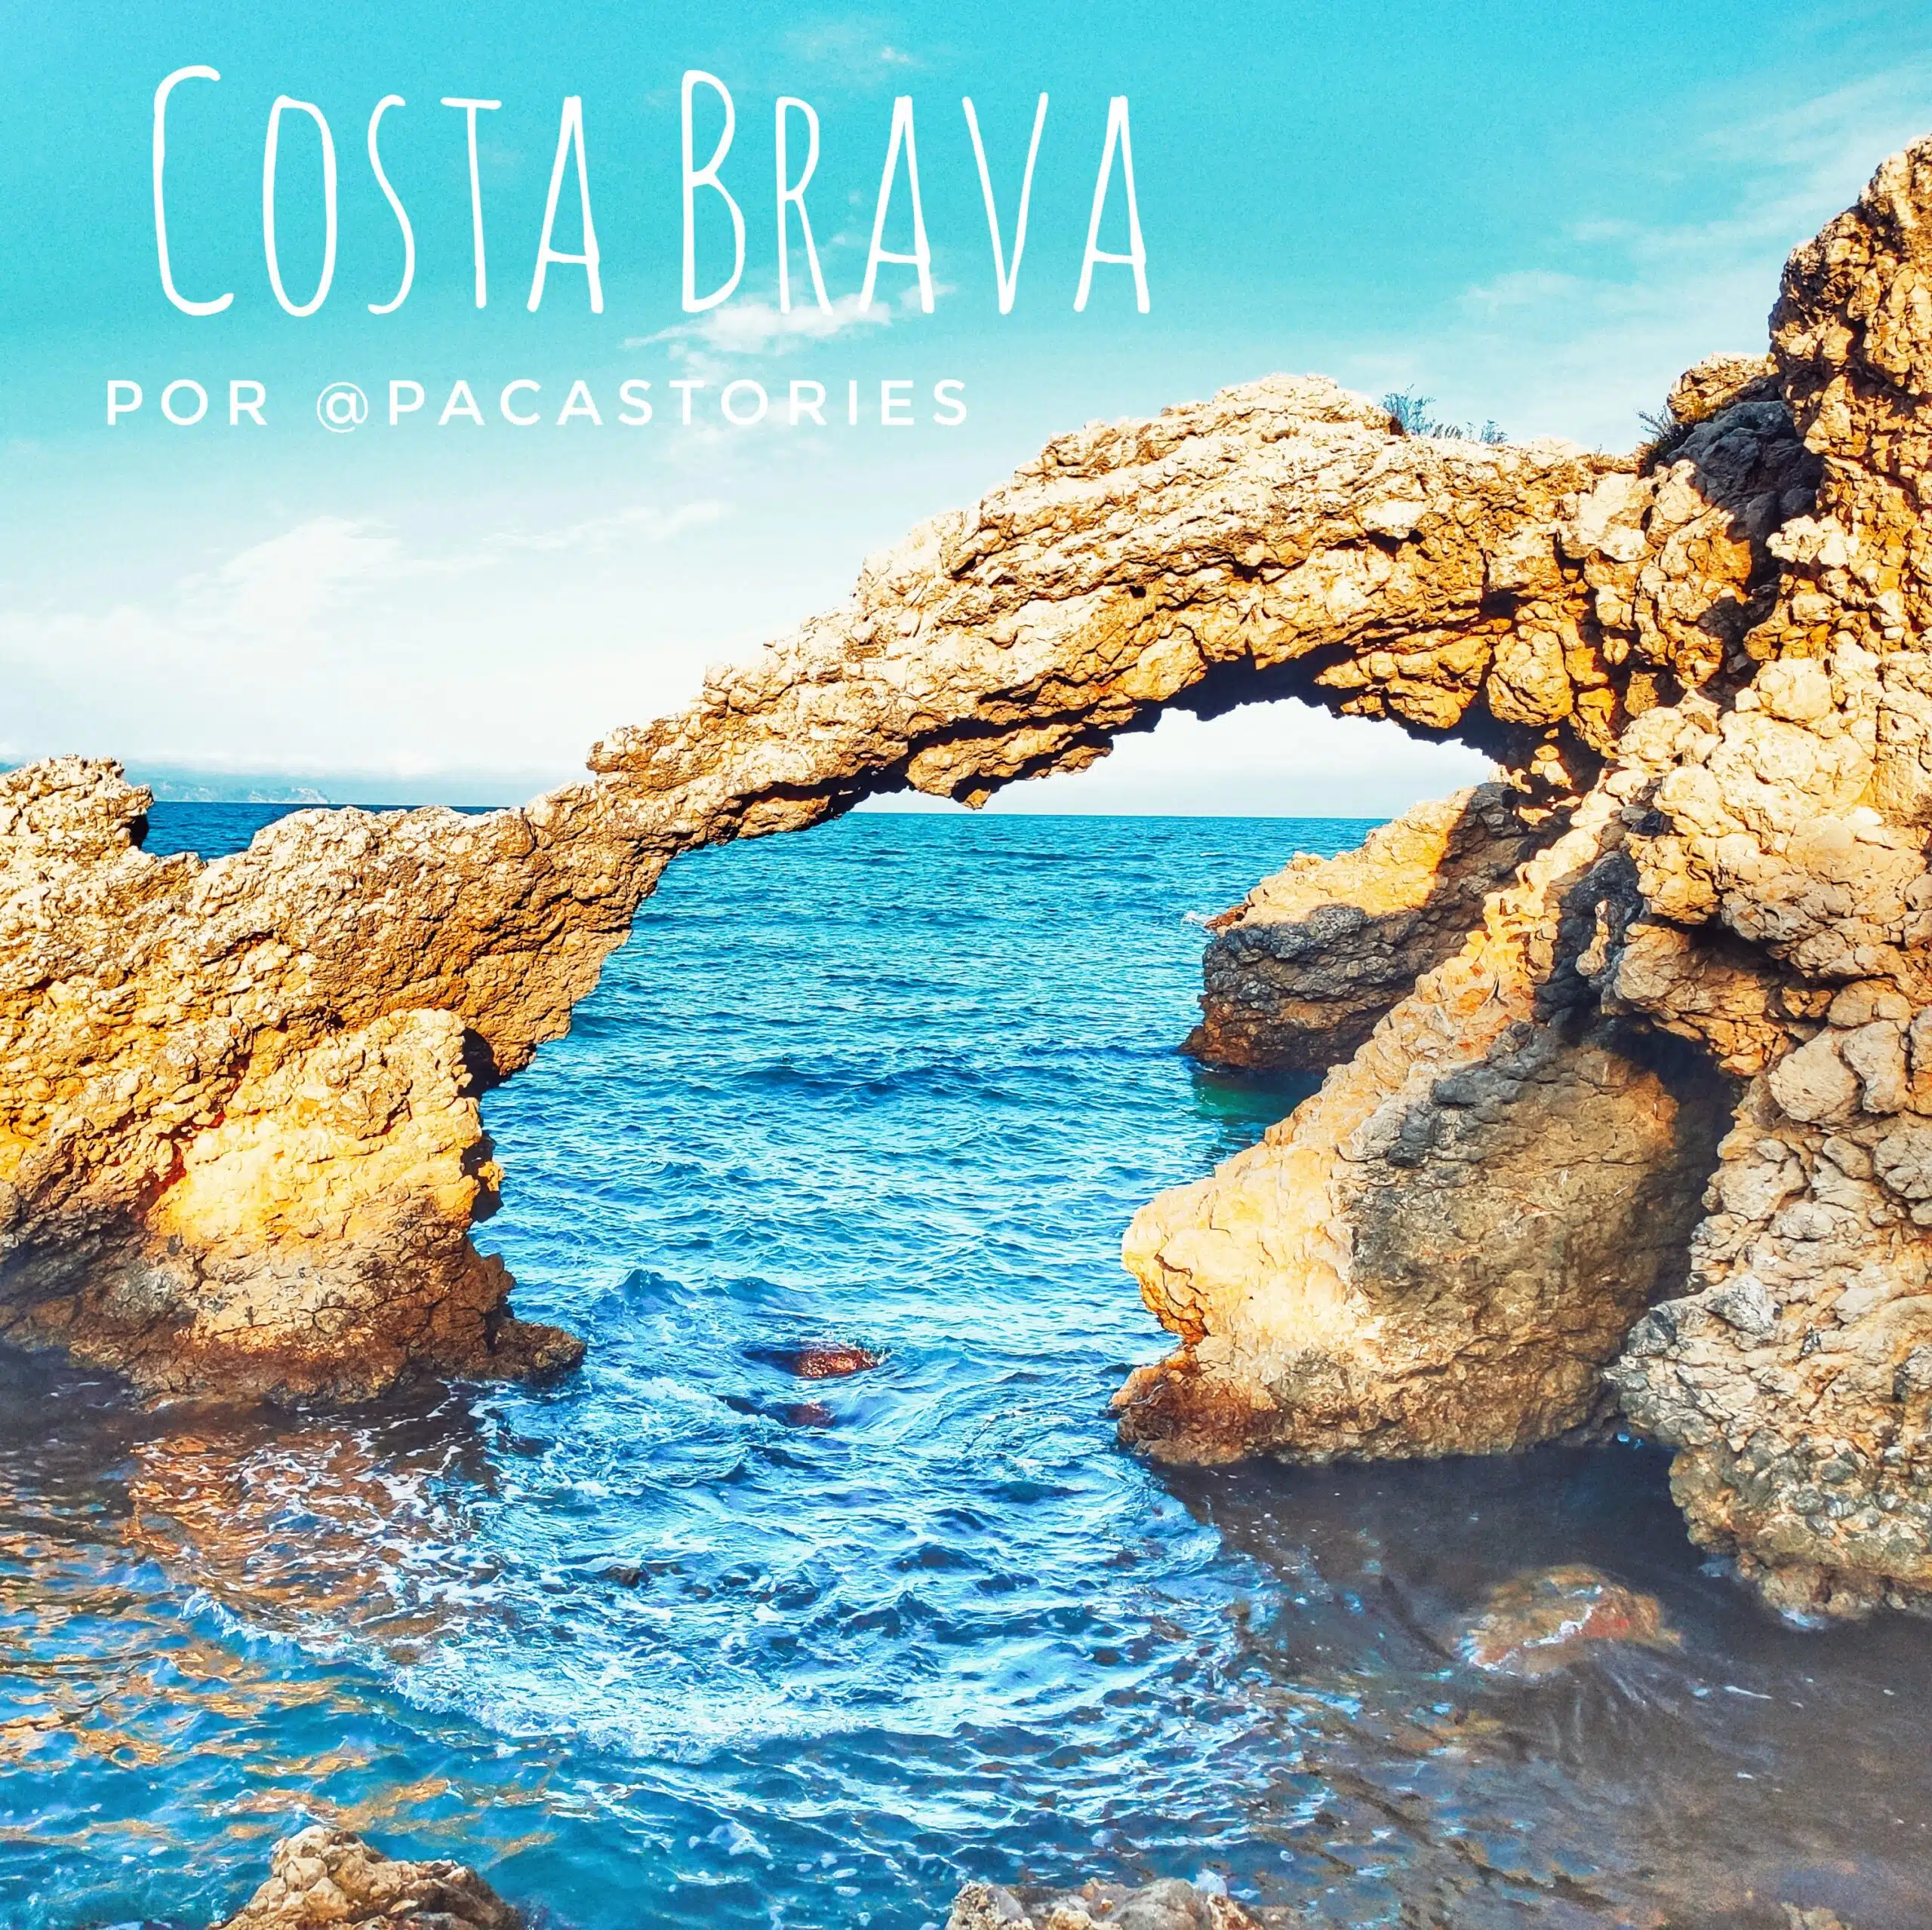 17 incredible destinations to discover the Costa Brava by motorhome